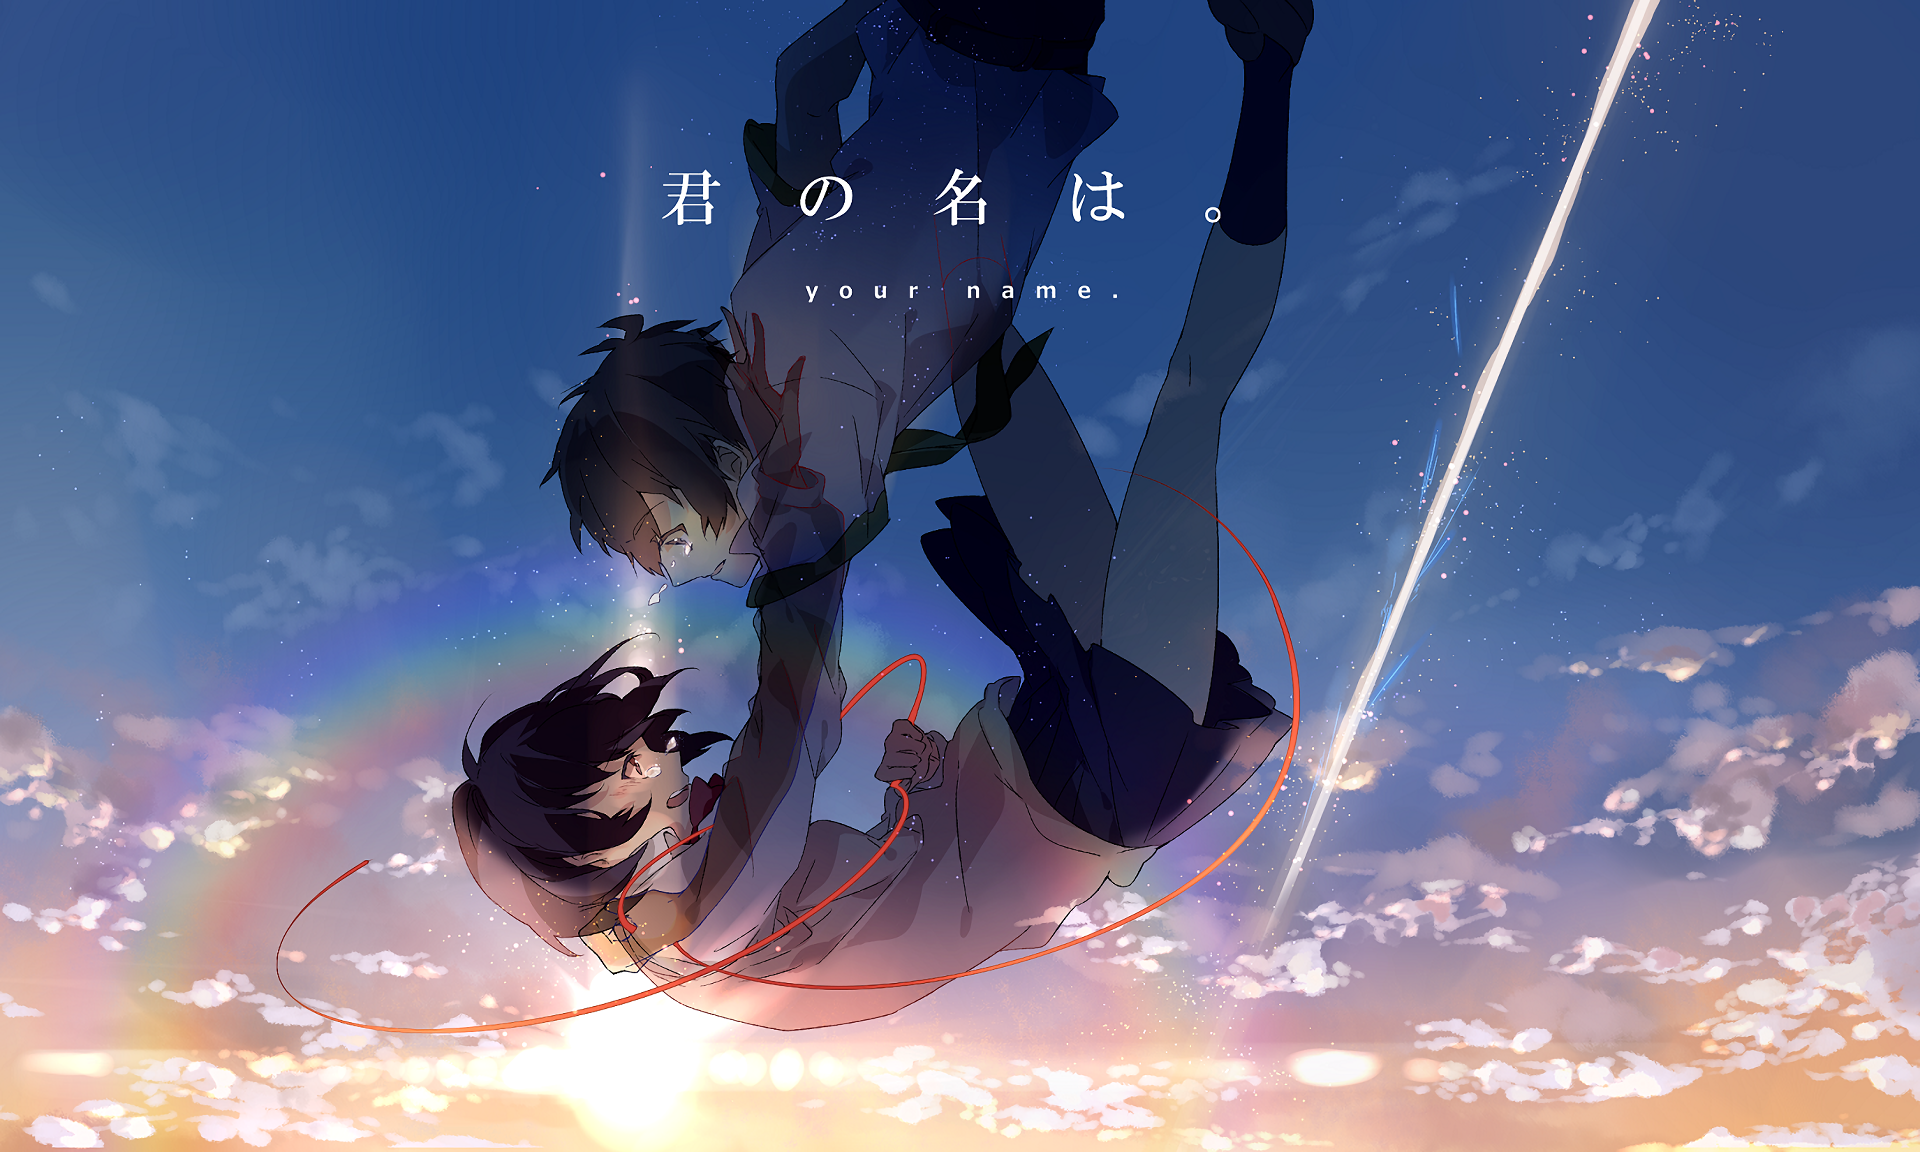 Taki and Mitsuha (Your Name) by まなコ